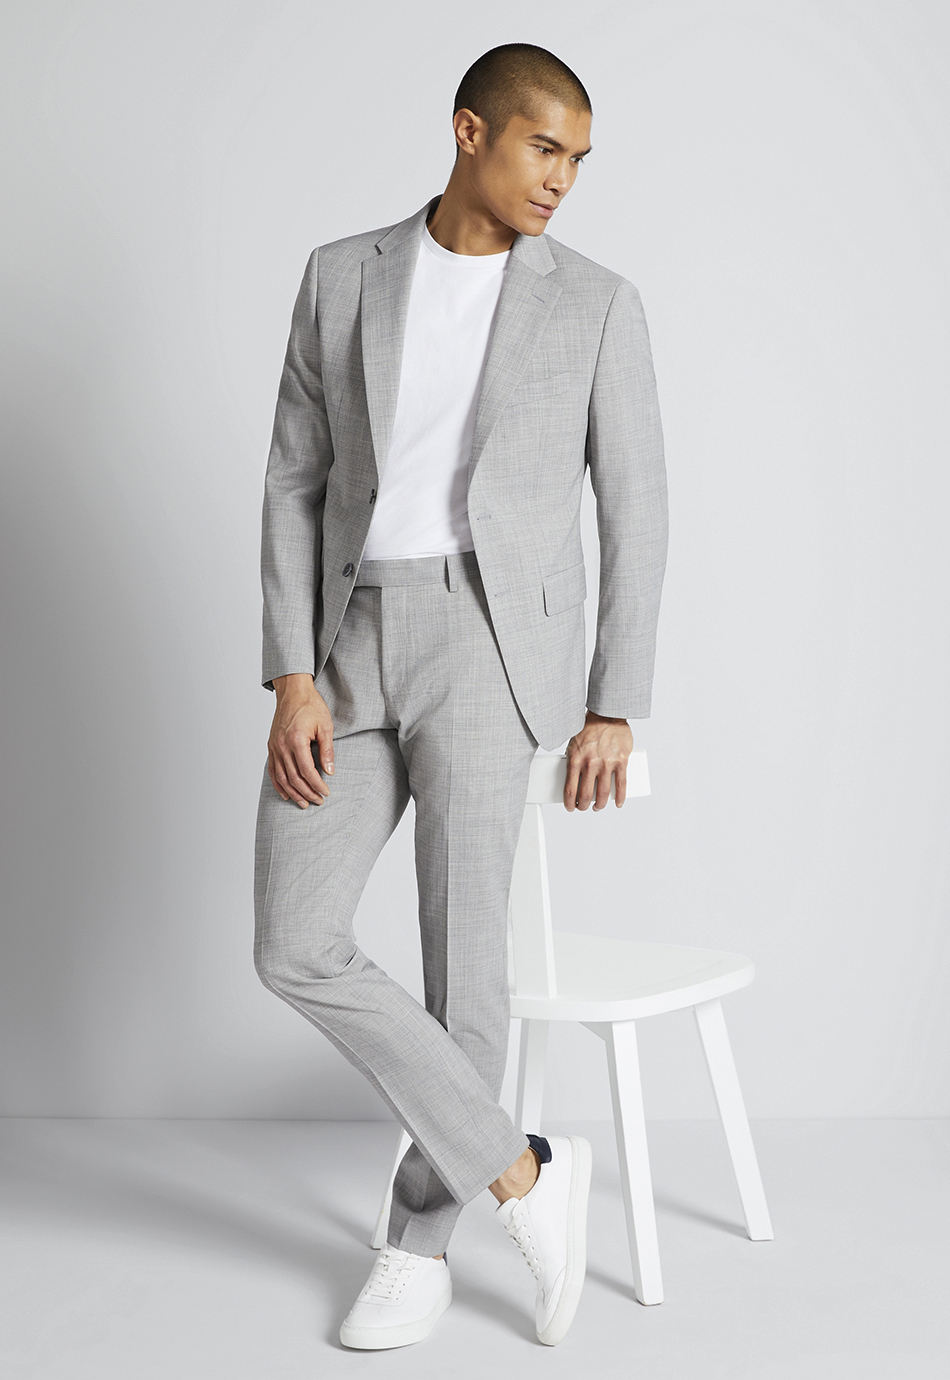 grey suit, white t-shirt, and white sneakers